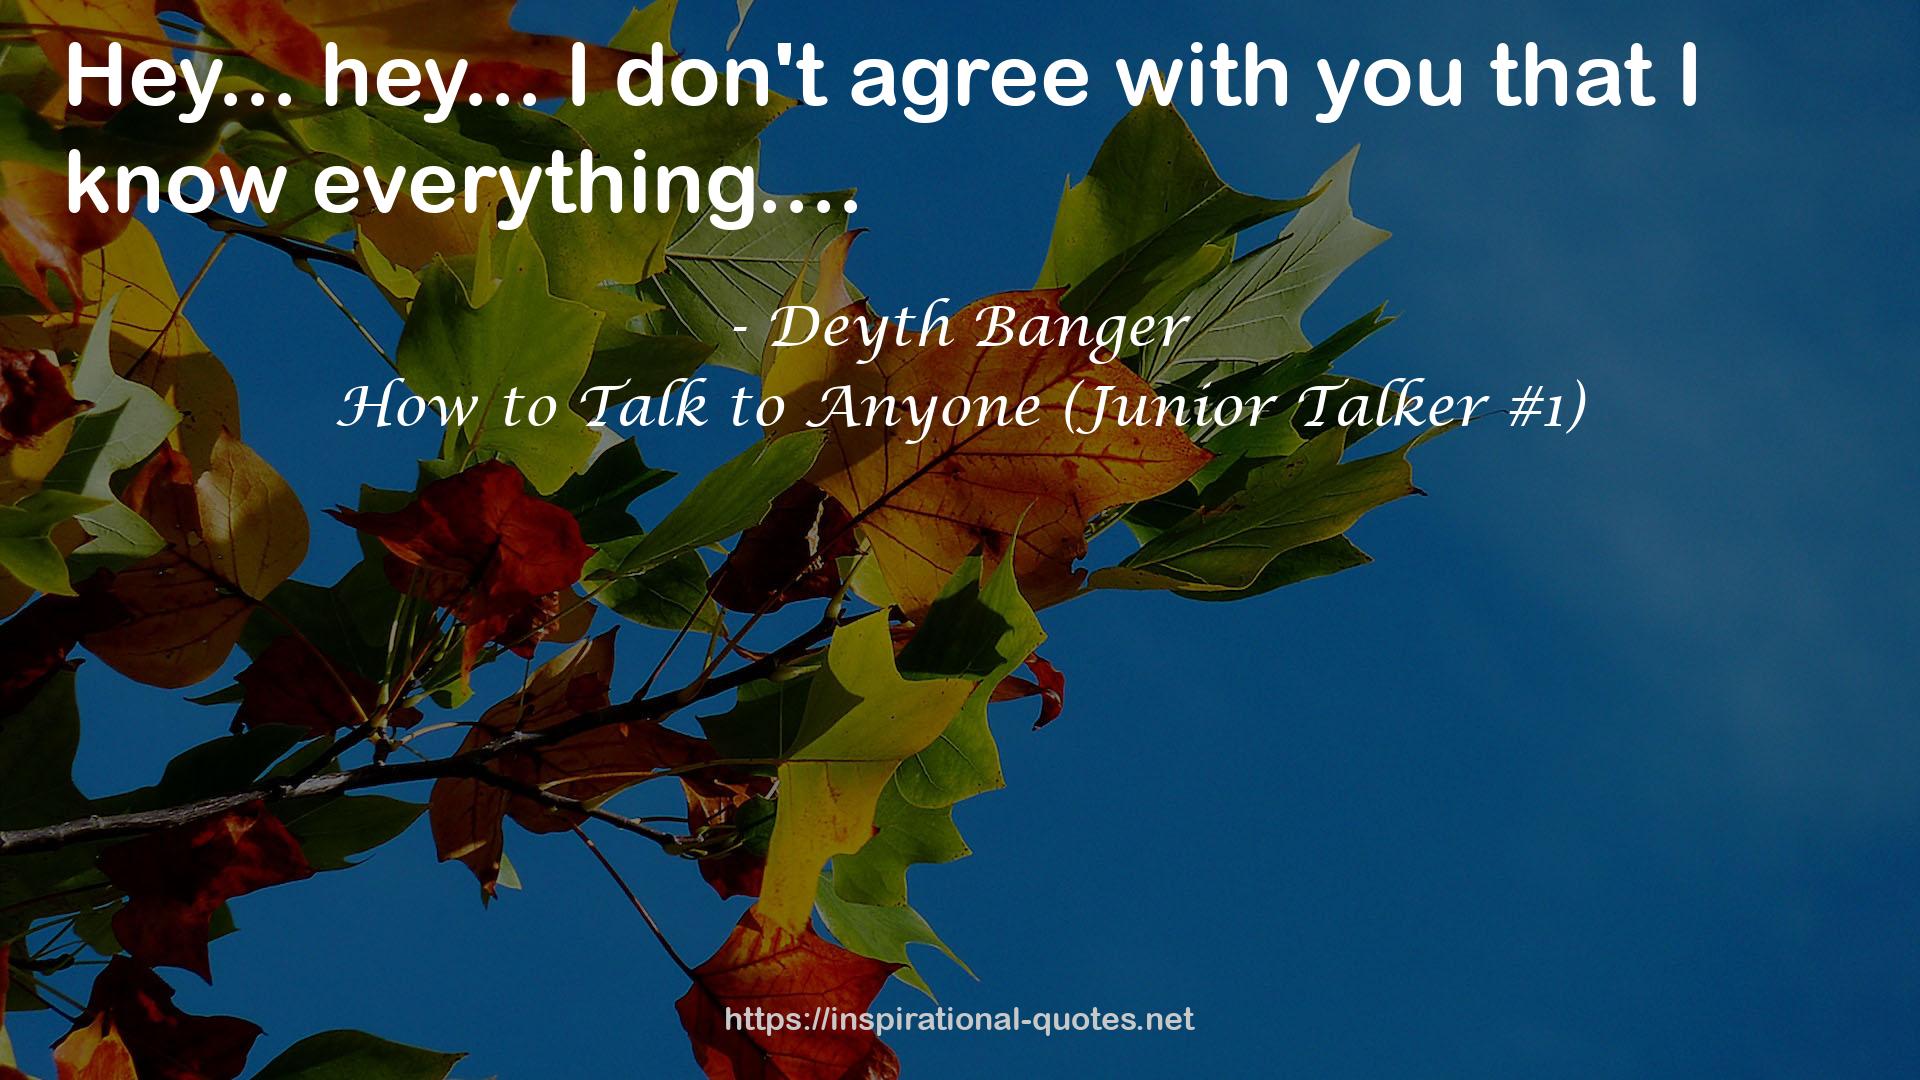 How to Talk to Anyone (Junior Talker #1) QUOTES